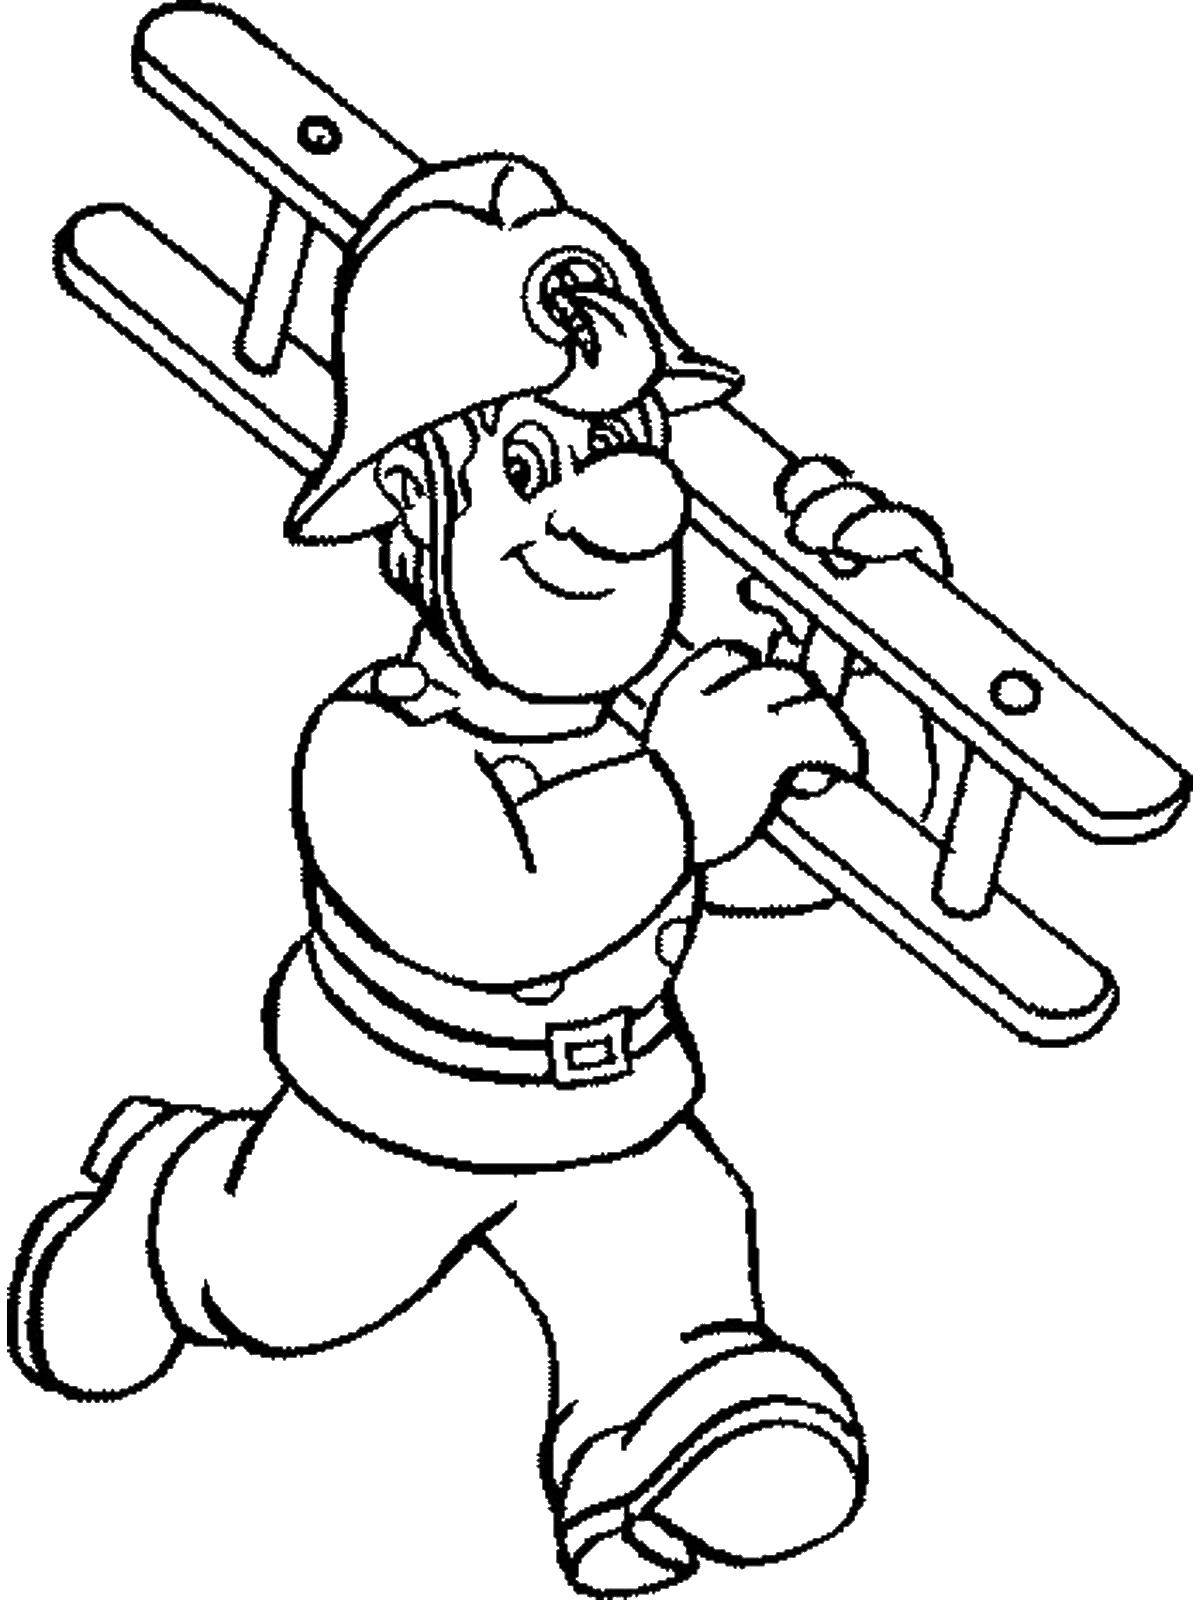 Coloring Rescuer with ladder. Category a profession. Tags:  profession, rescue.